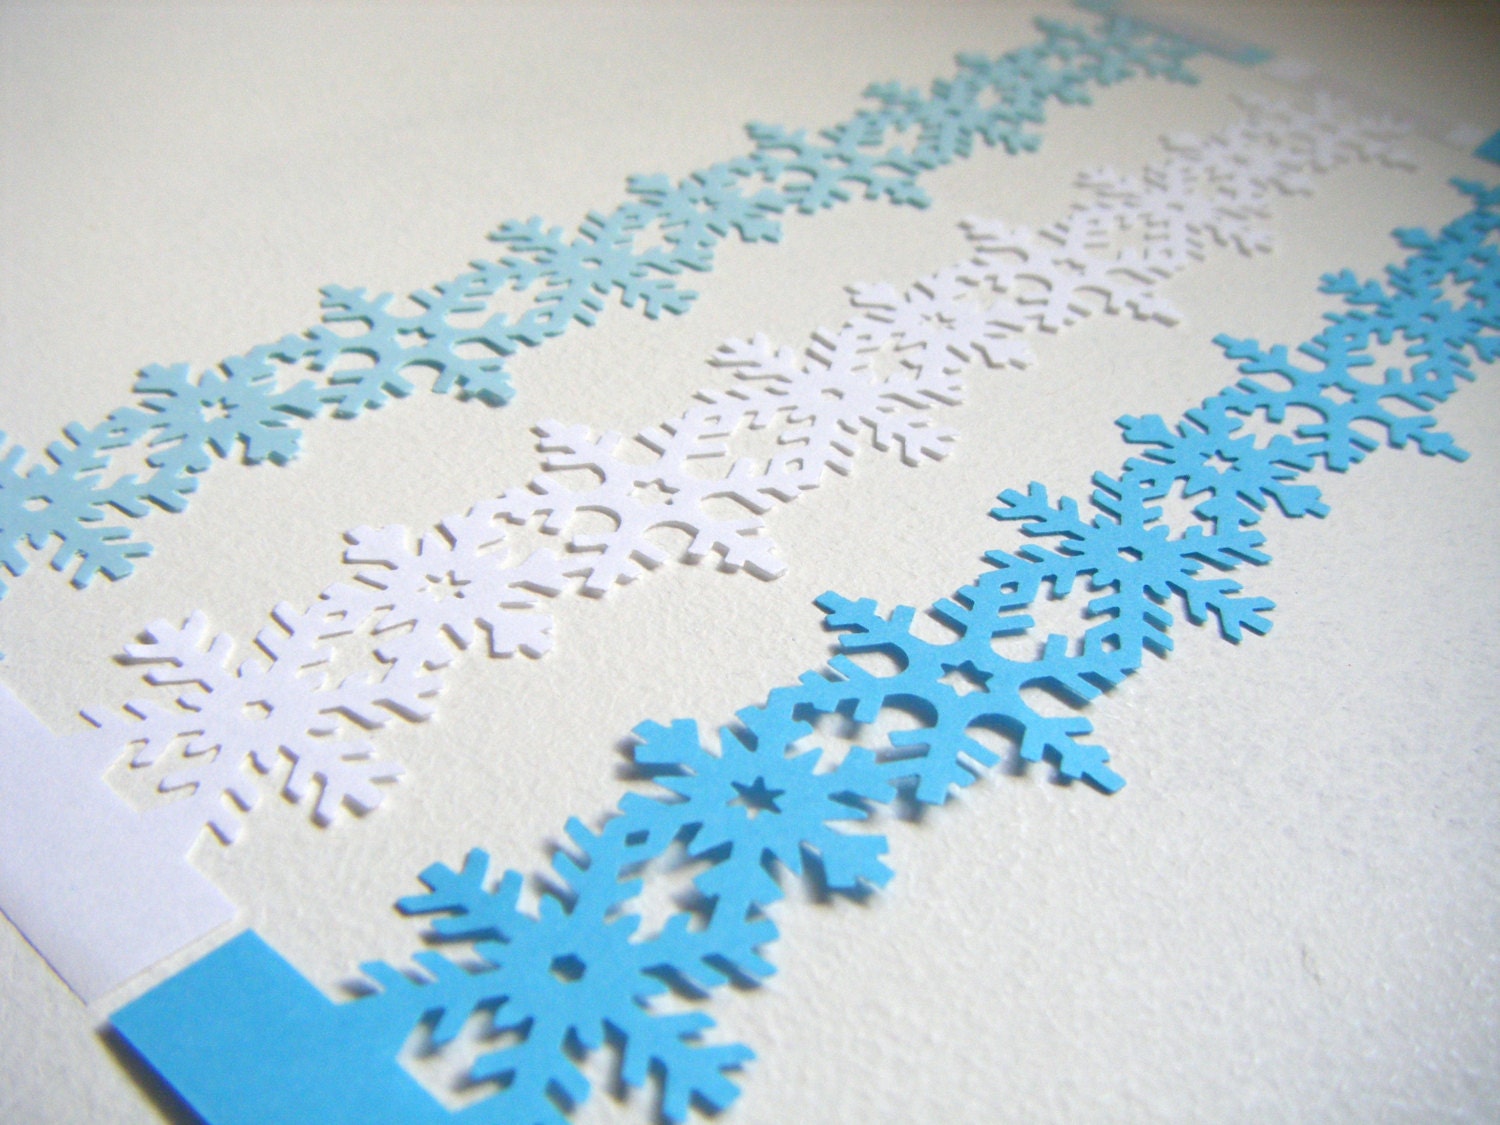 How To Make Paper Snowflake Chains / Paper Chain Snowflakes DIY